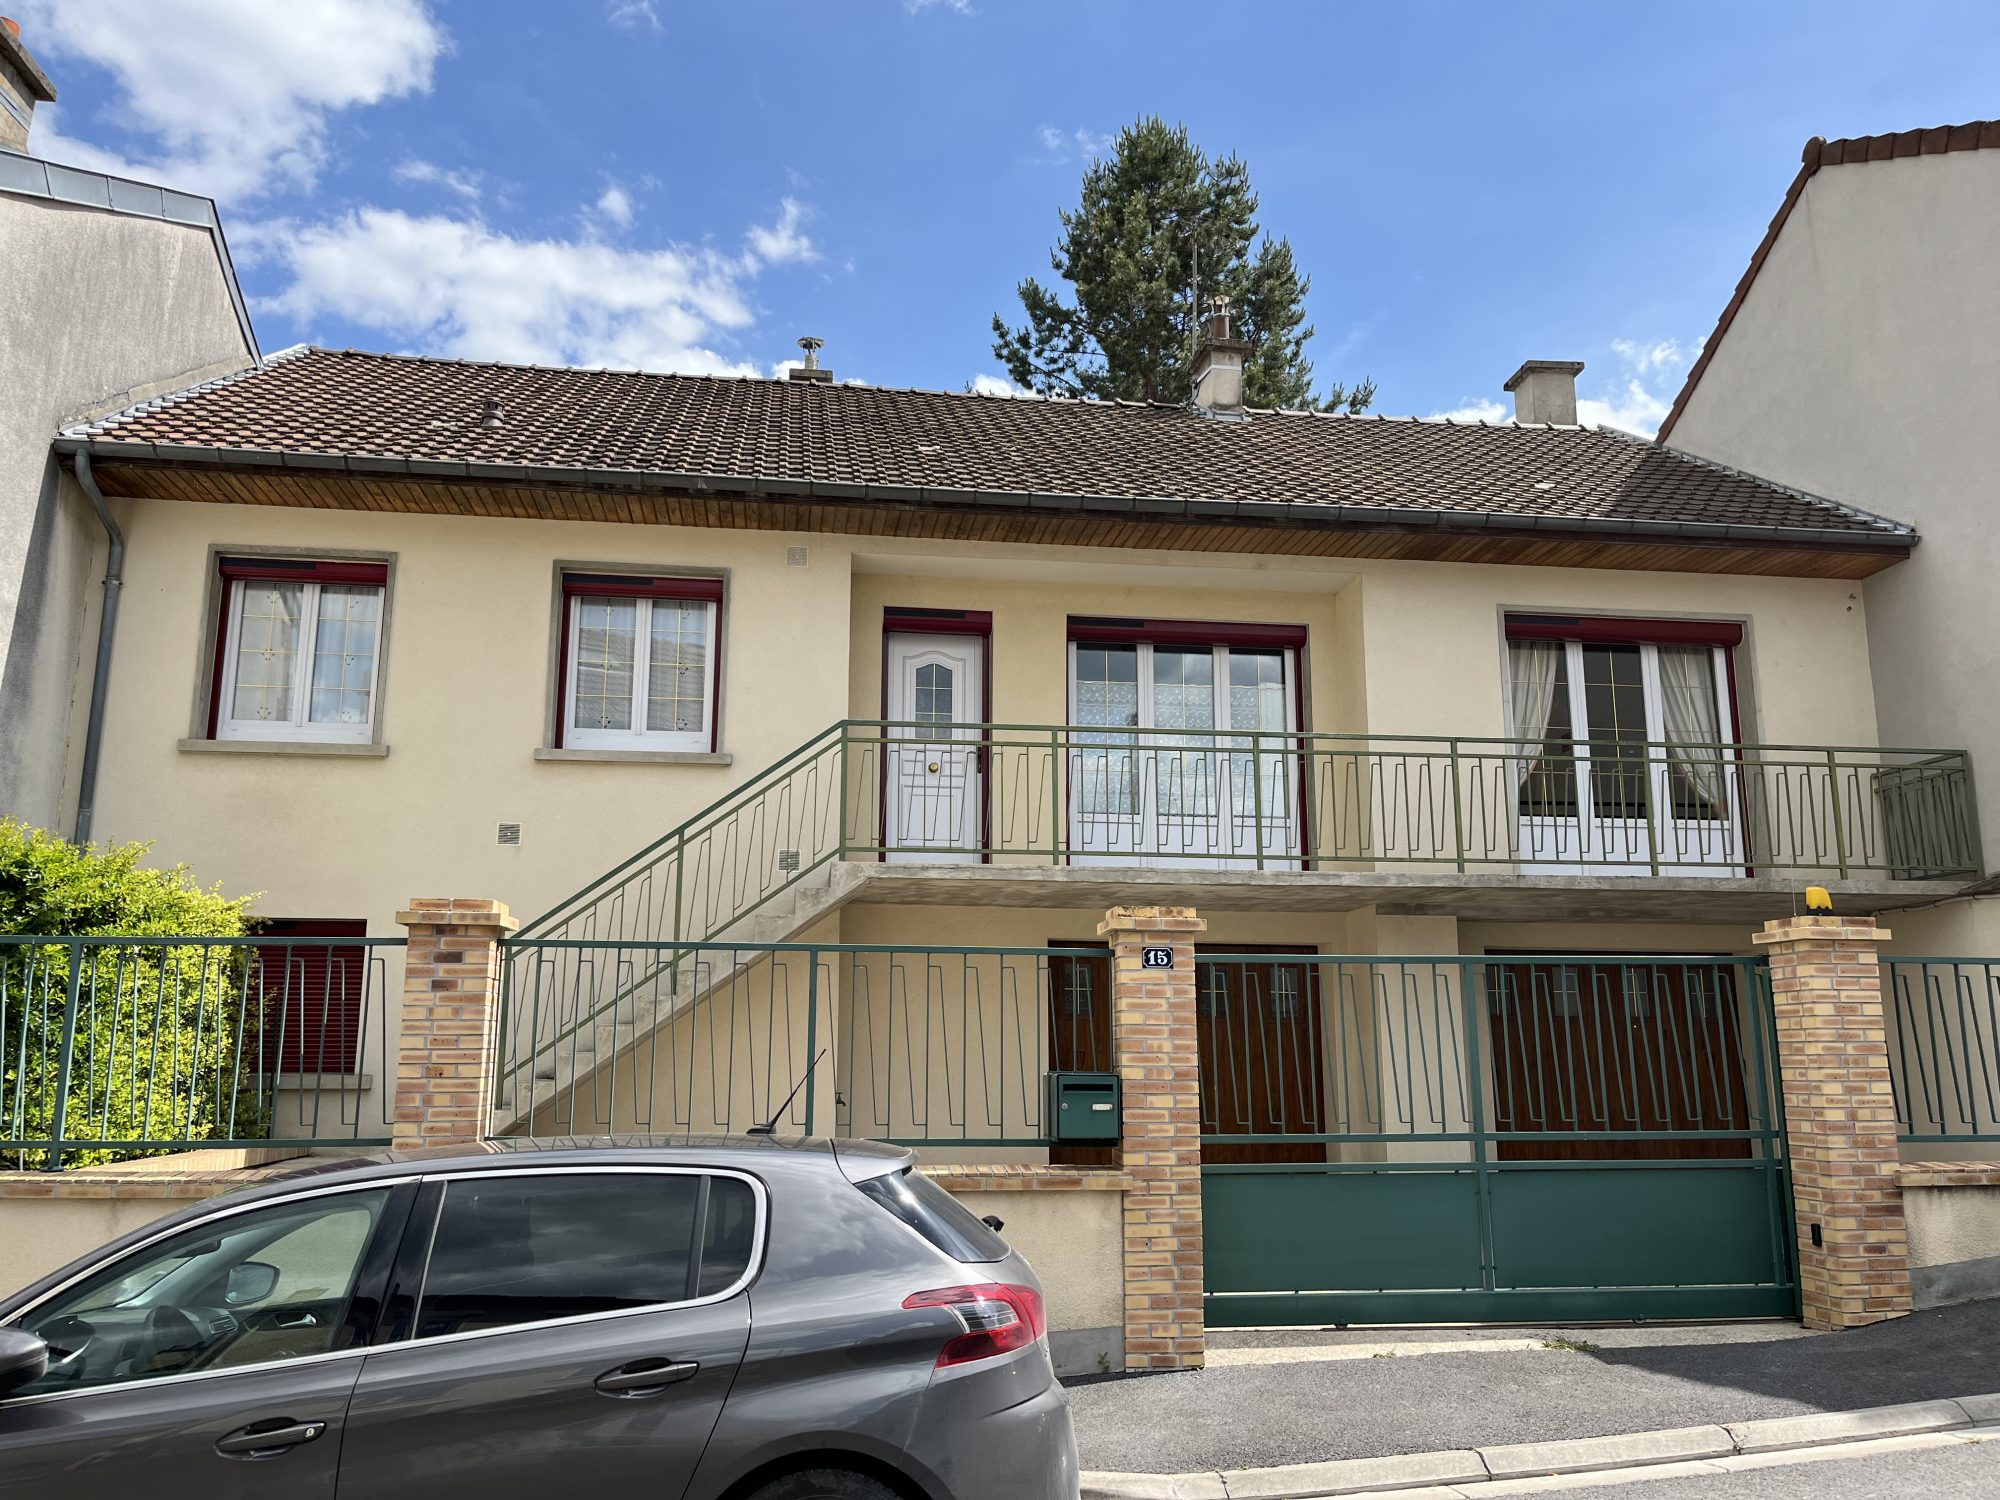 Immobilier vente à EPERNAY Maison - Type 4